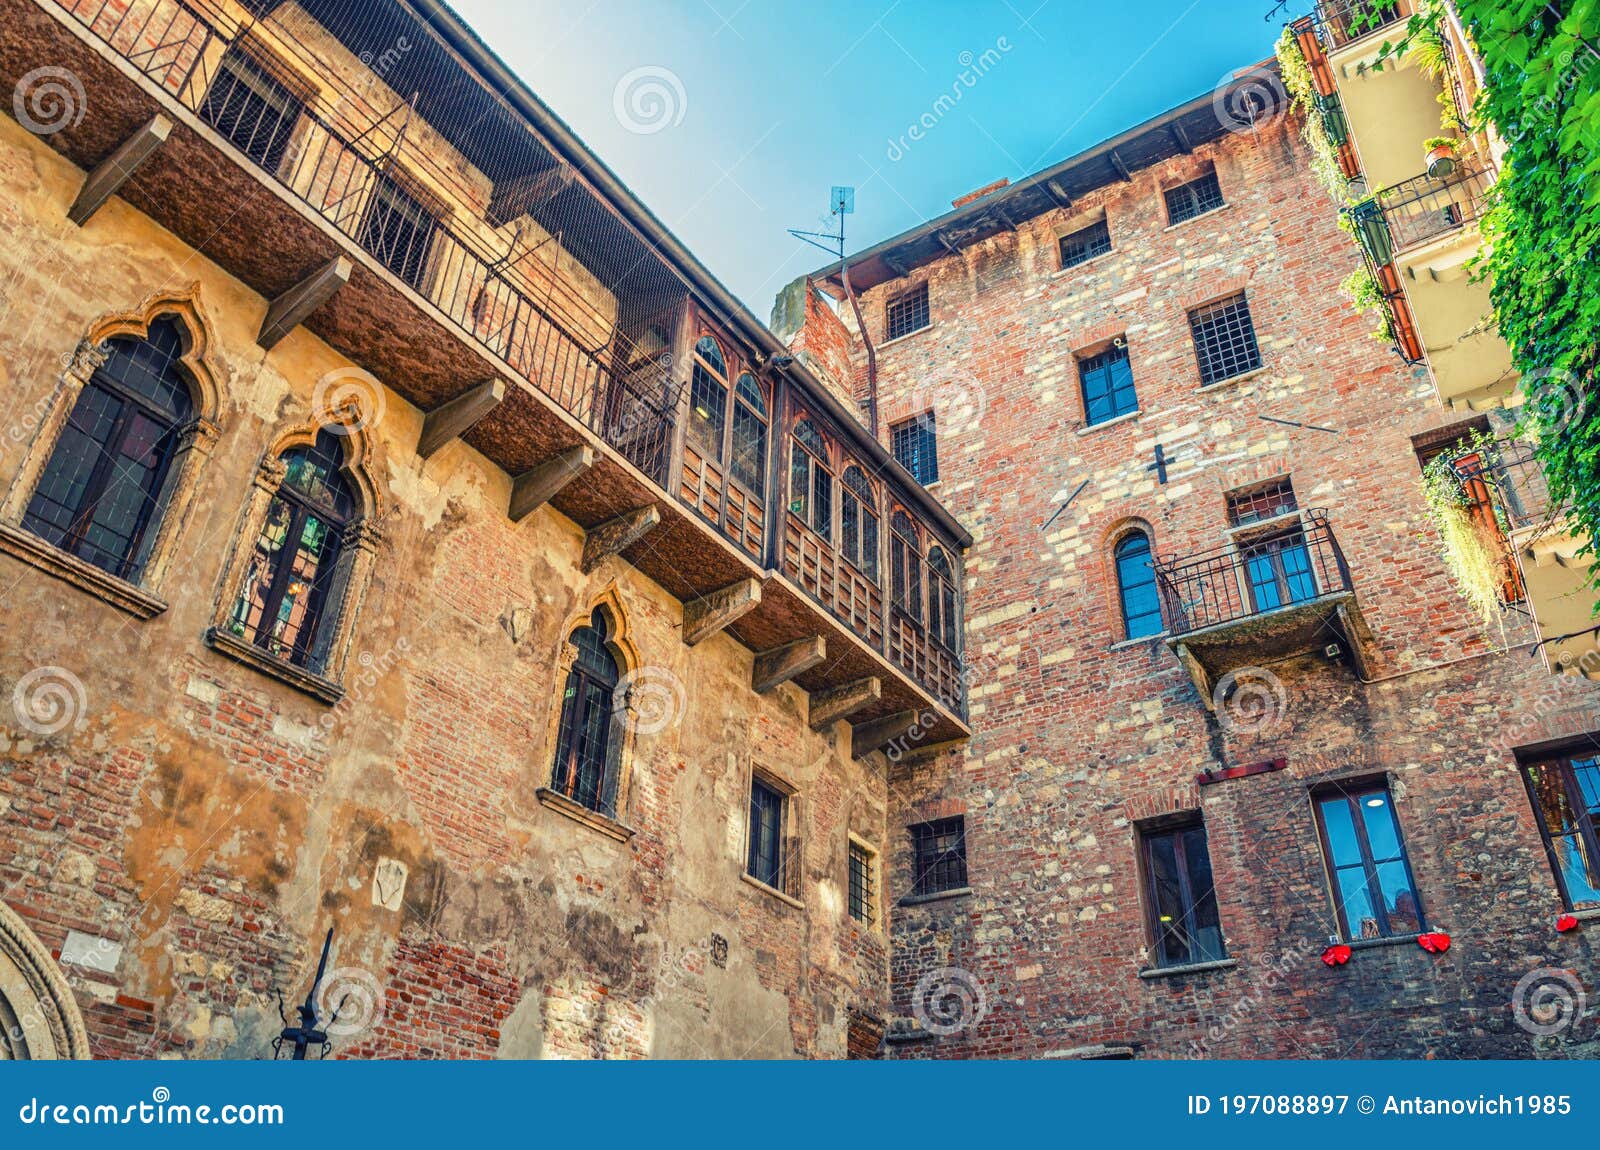 casa di giulietta with windows and brick wall of building, juliet capulet house courtyard in verona